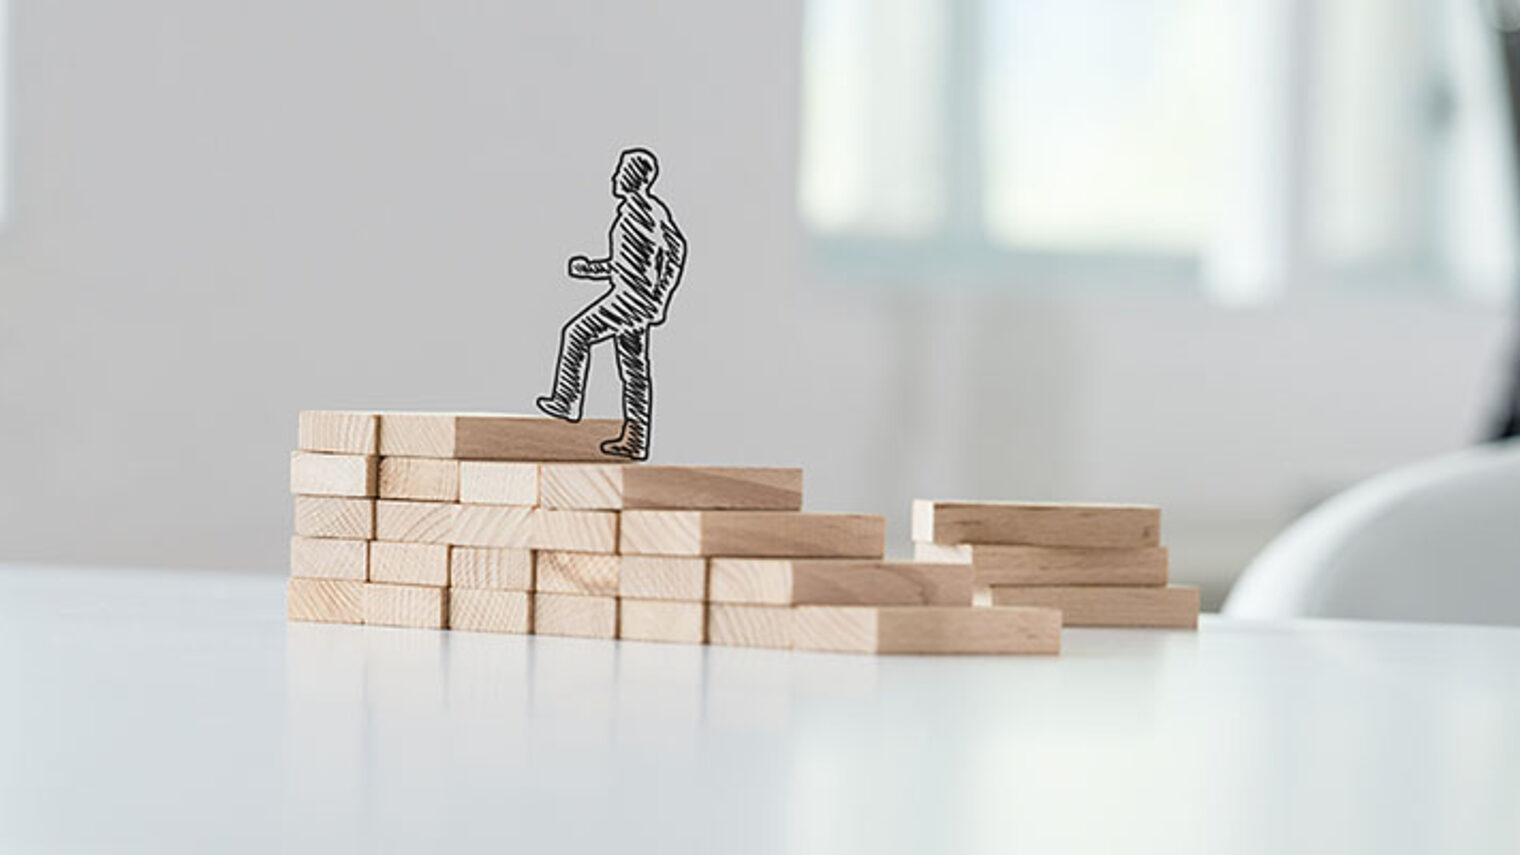 Wide view image of hand drawn silhouette of a businessman climbing up the steps made of wooden pegs on a business office desk. Schlagwort(e): promotion, ambition, education, business, career, upward, success, up, moving, businessman, stairs, step, achievement, development, progress, climbing, growth, walking, climb, successful, professional, confident, opportunity, challenge, grow, forward, graduation, effort, improvement, determination, motivation, life, strategy, direction, associate, knowledge, advance, breakthrough, process, aspiration, personal, wide, view, wooden, steps, stairway, concept, silhouette, office, desk, drawn